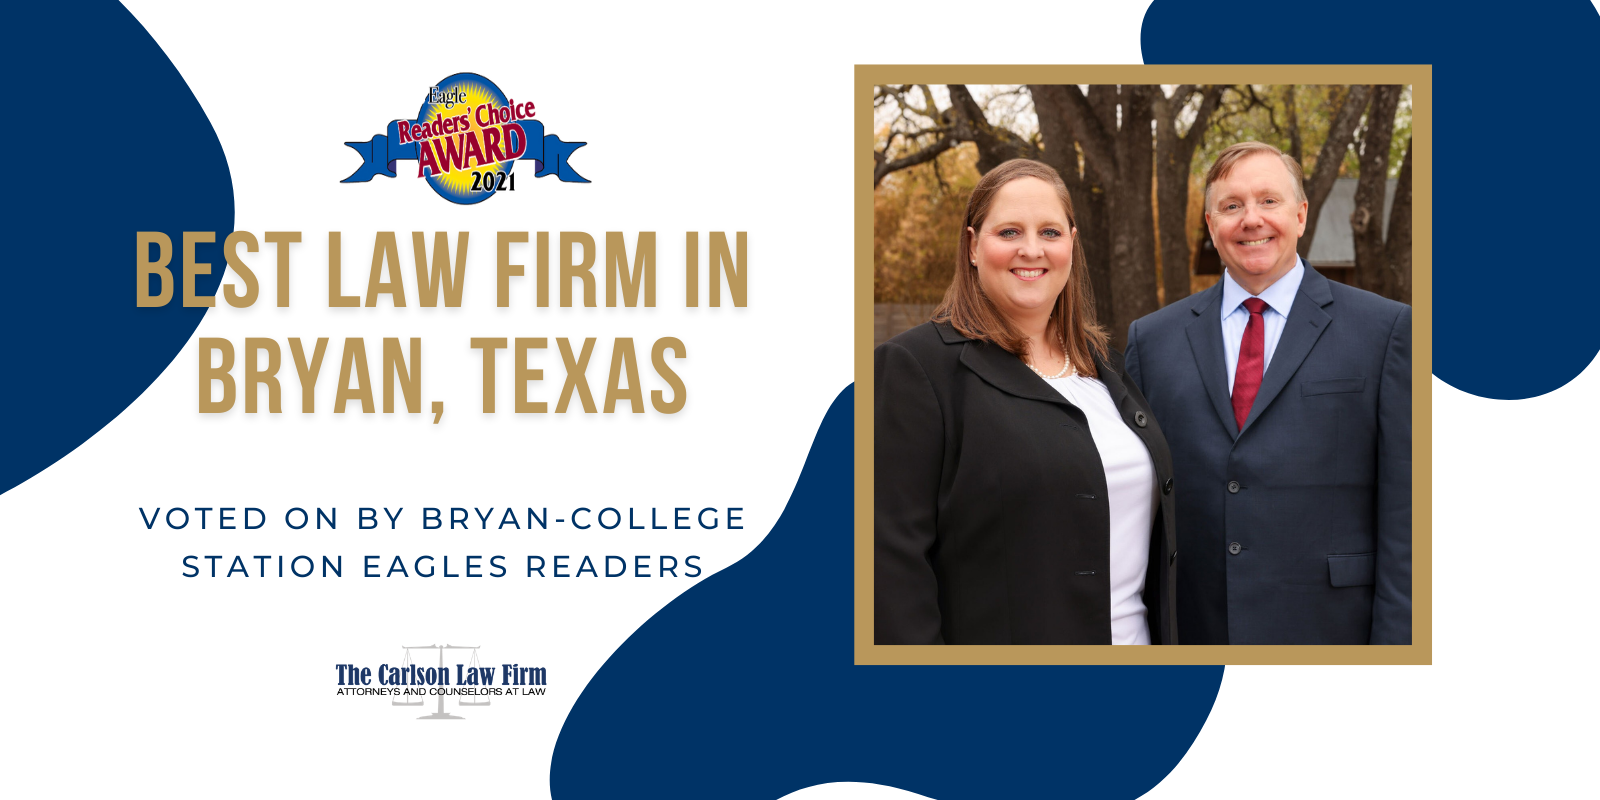 The Carlson Law Firm is the best law firm in Bryan, Texas according to Bryan Eagle readers.